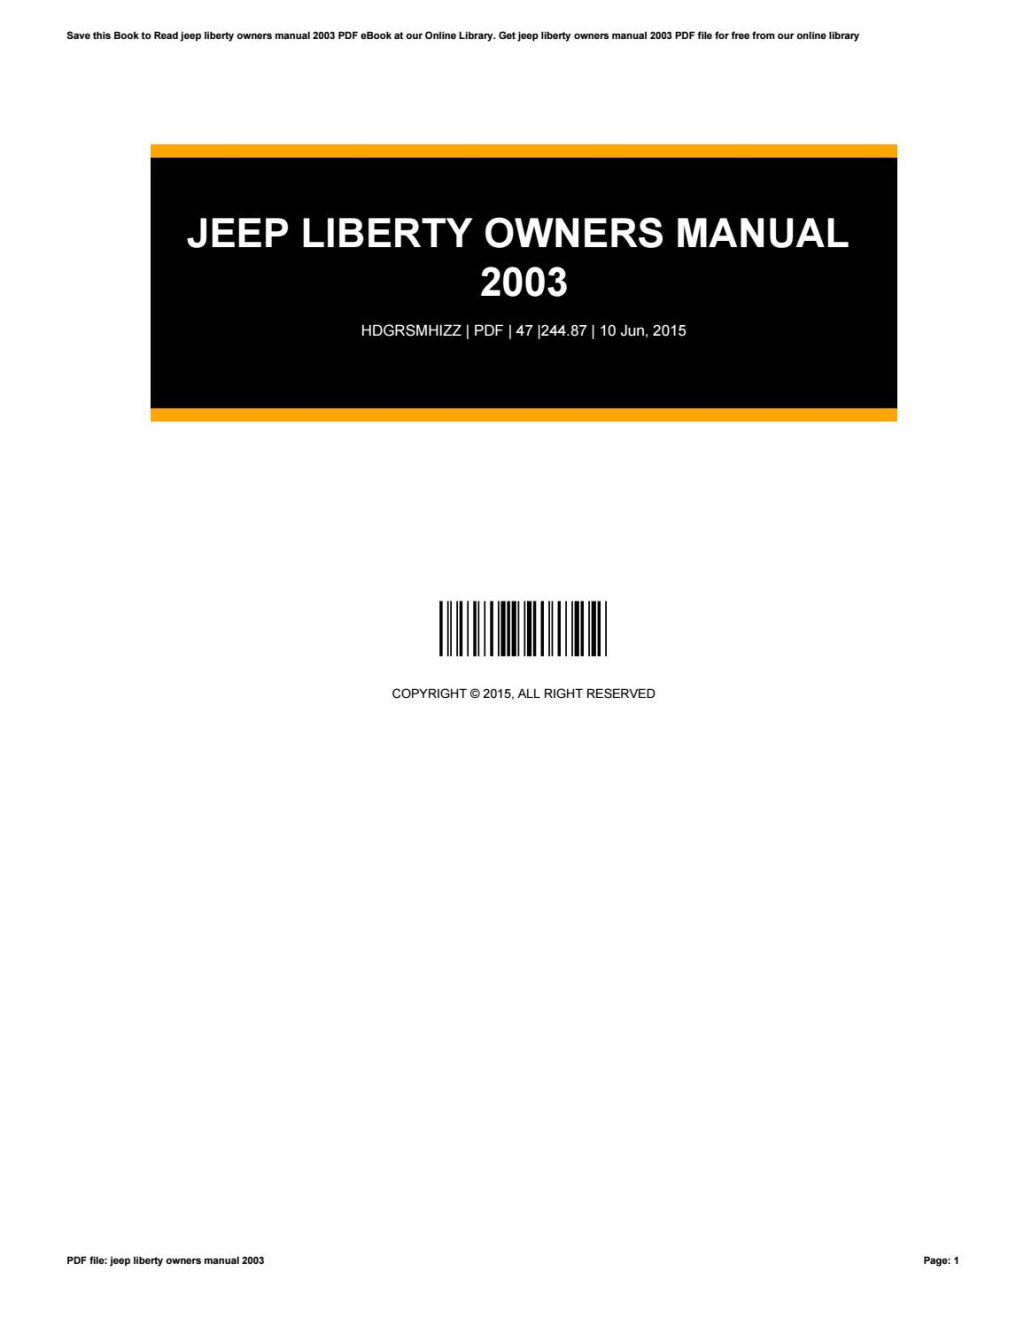 Picture of: Jeep liberty owners manual  by Barbara – Issuu